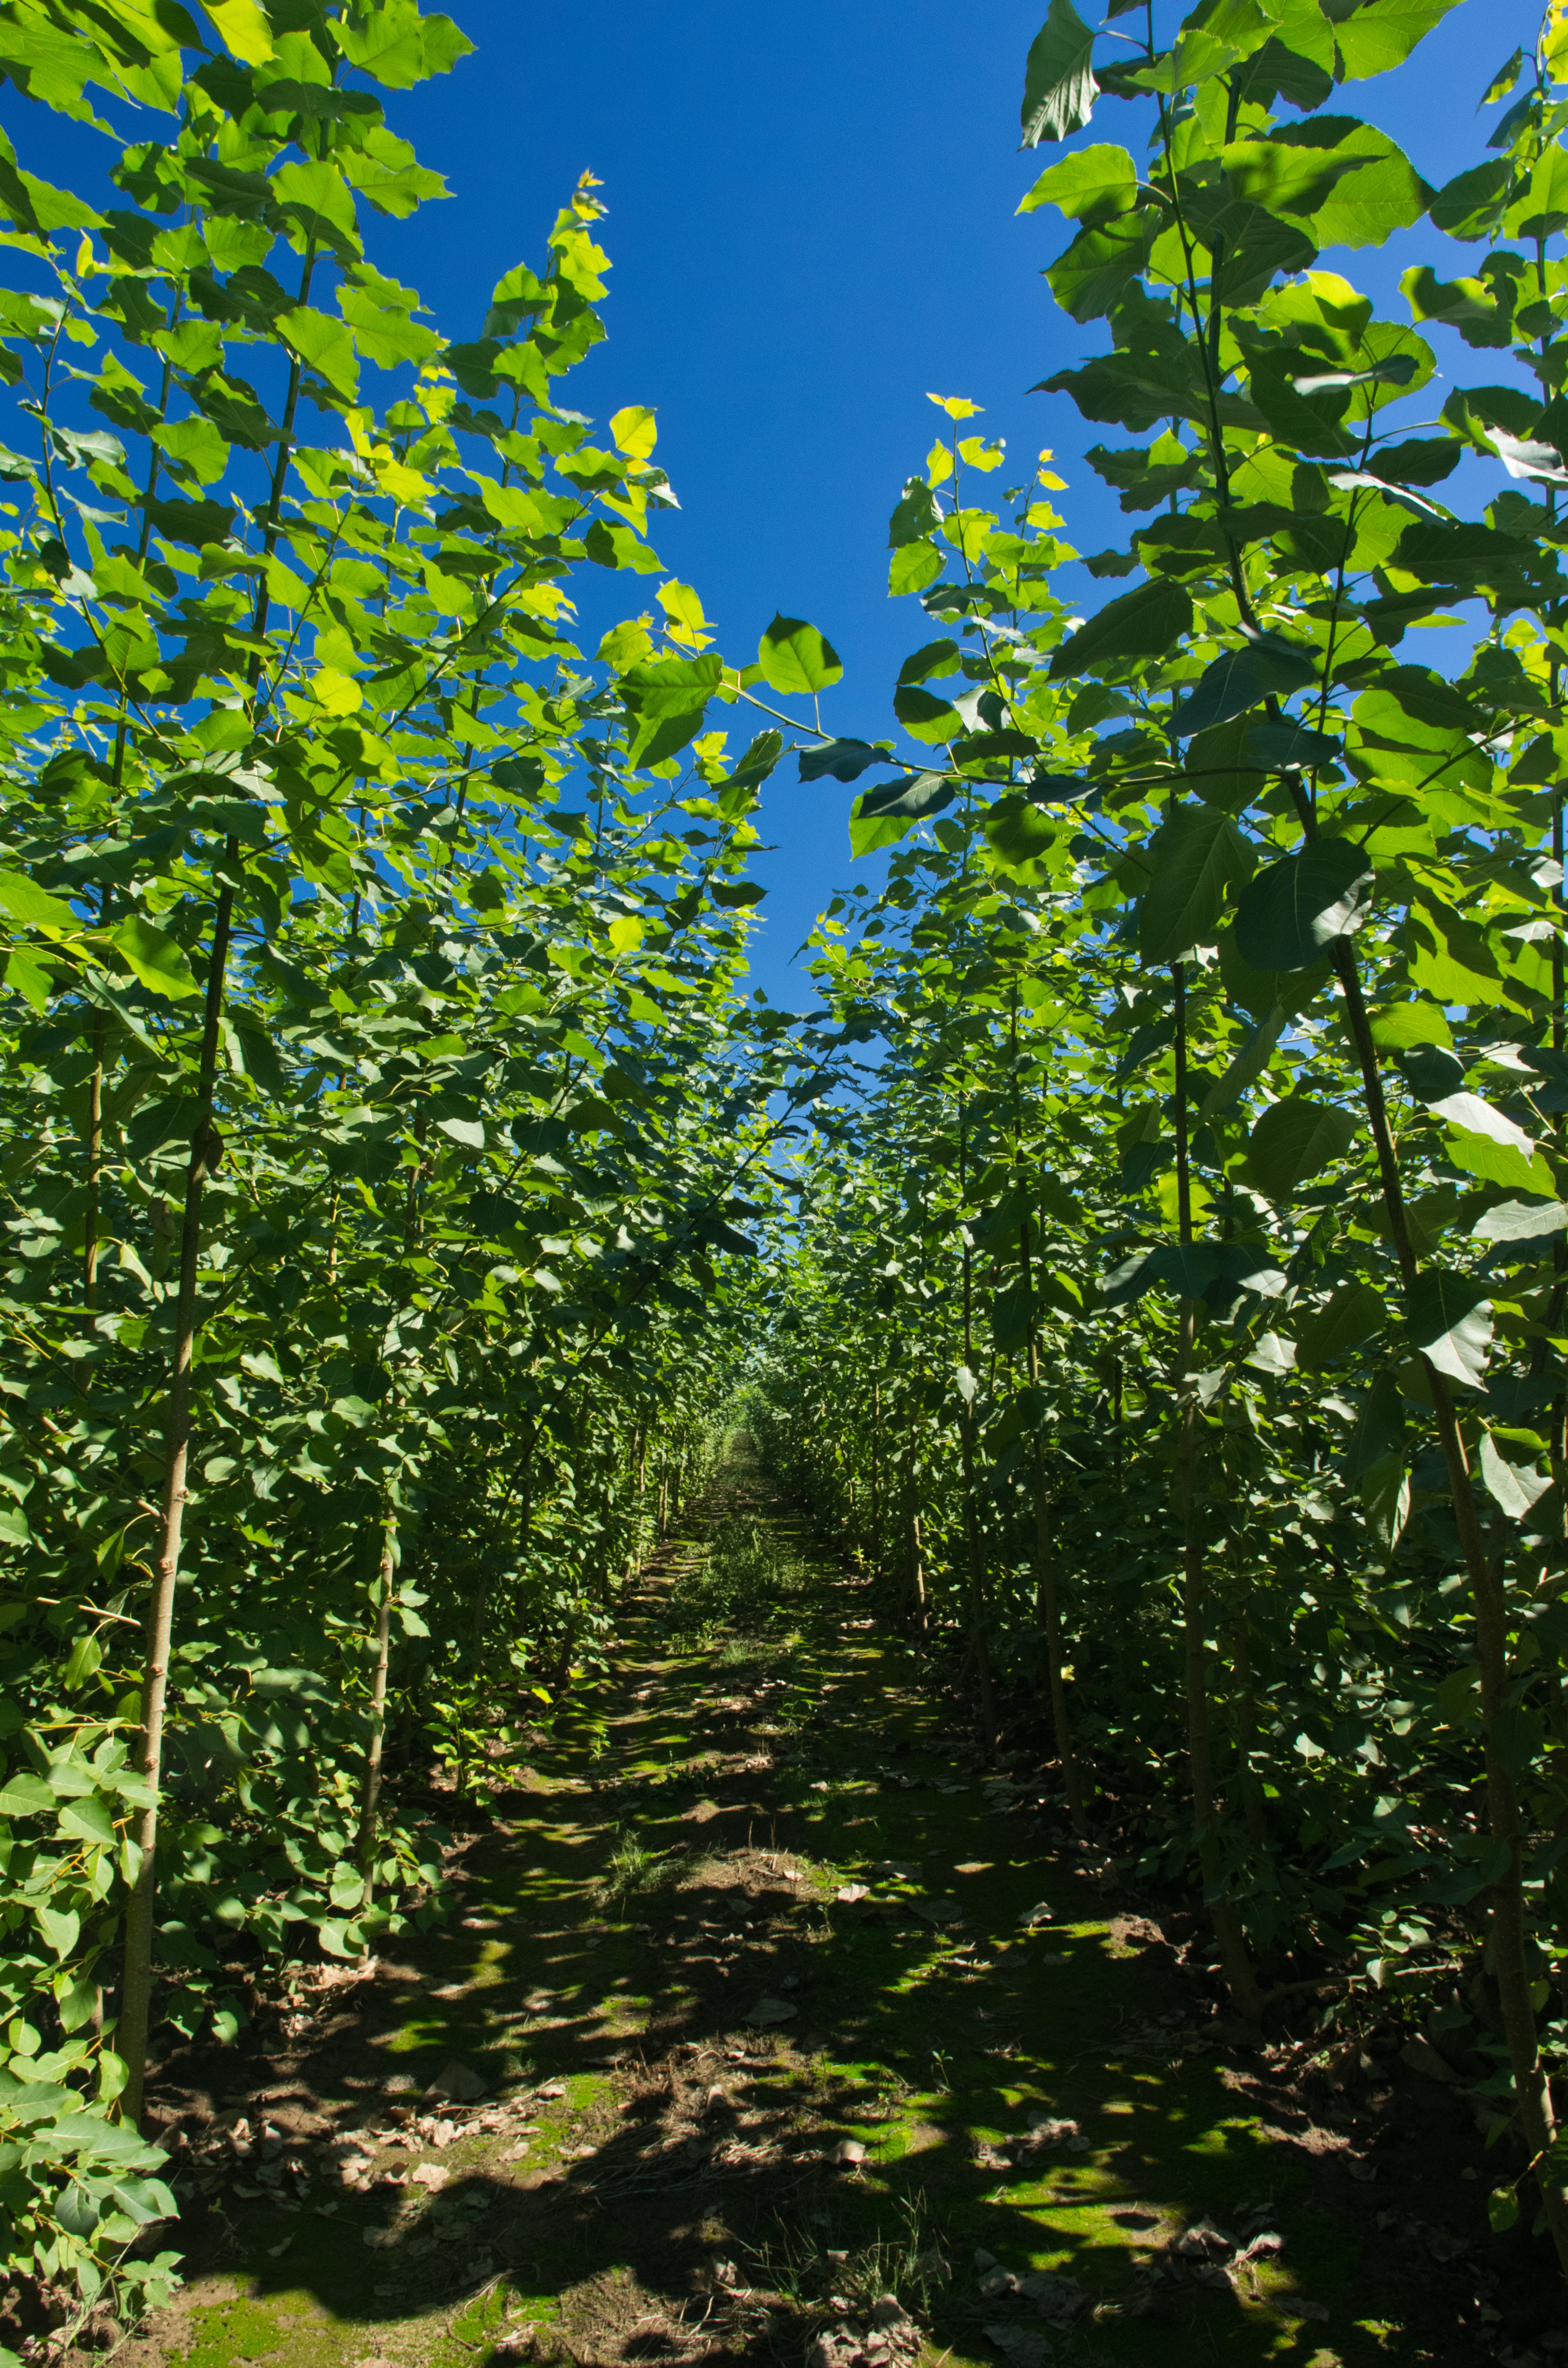 Poplar (Populus spp.) Trees for Biofuel Production - eXtension